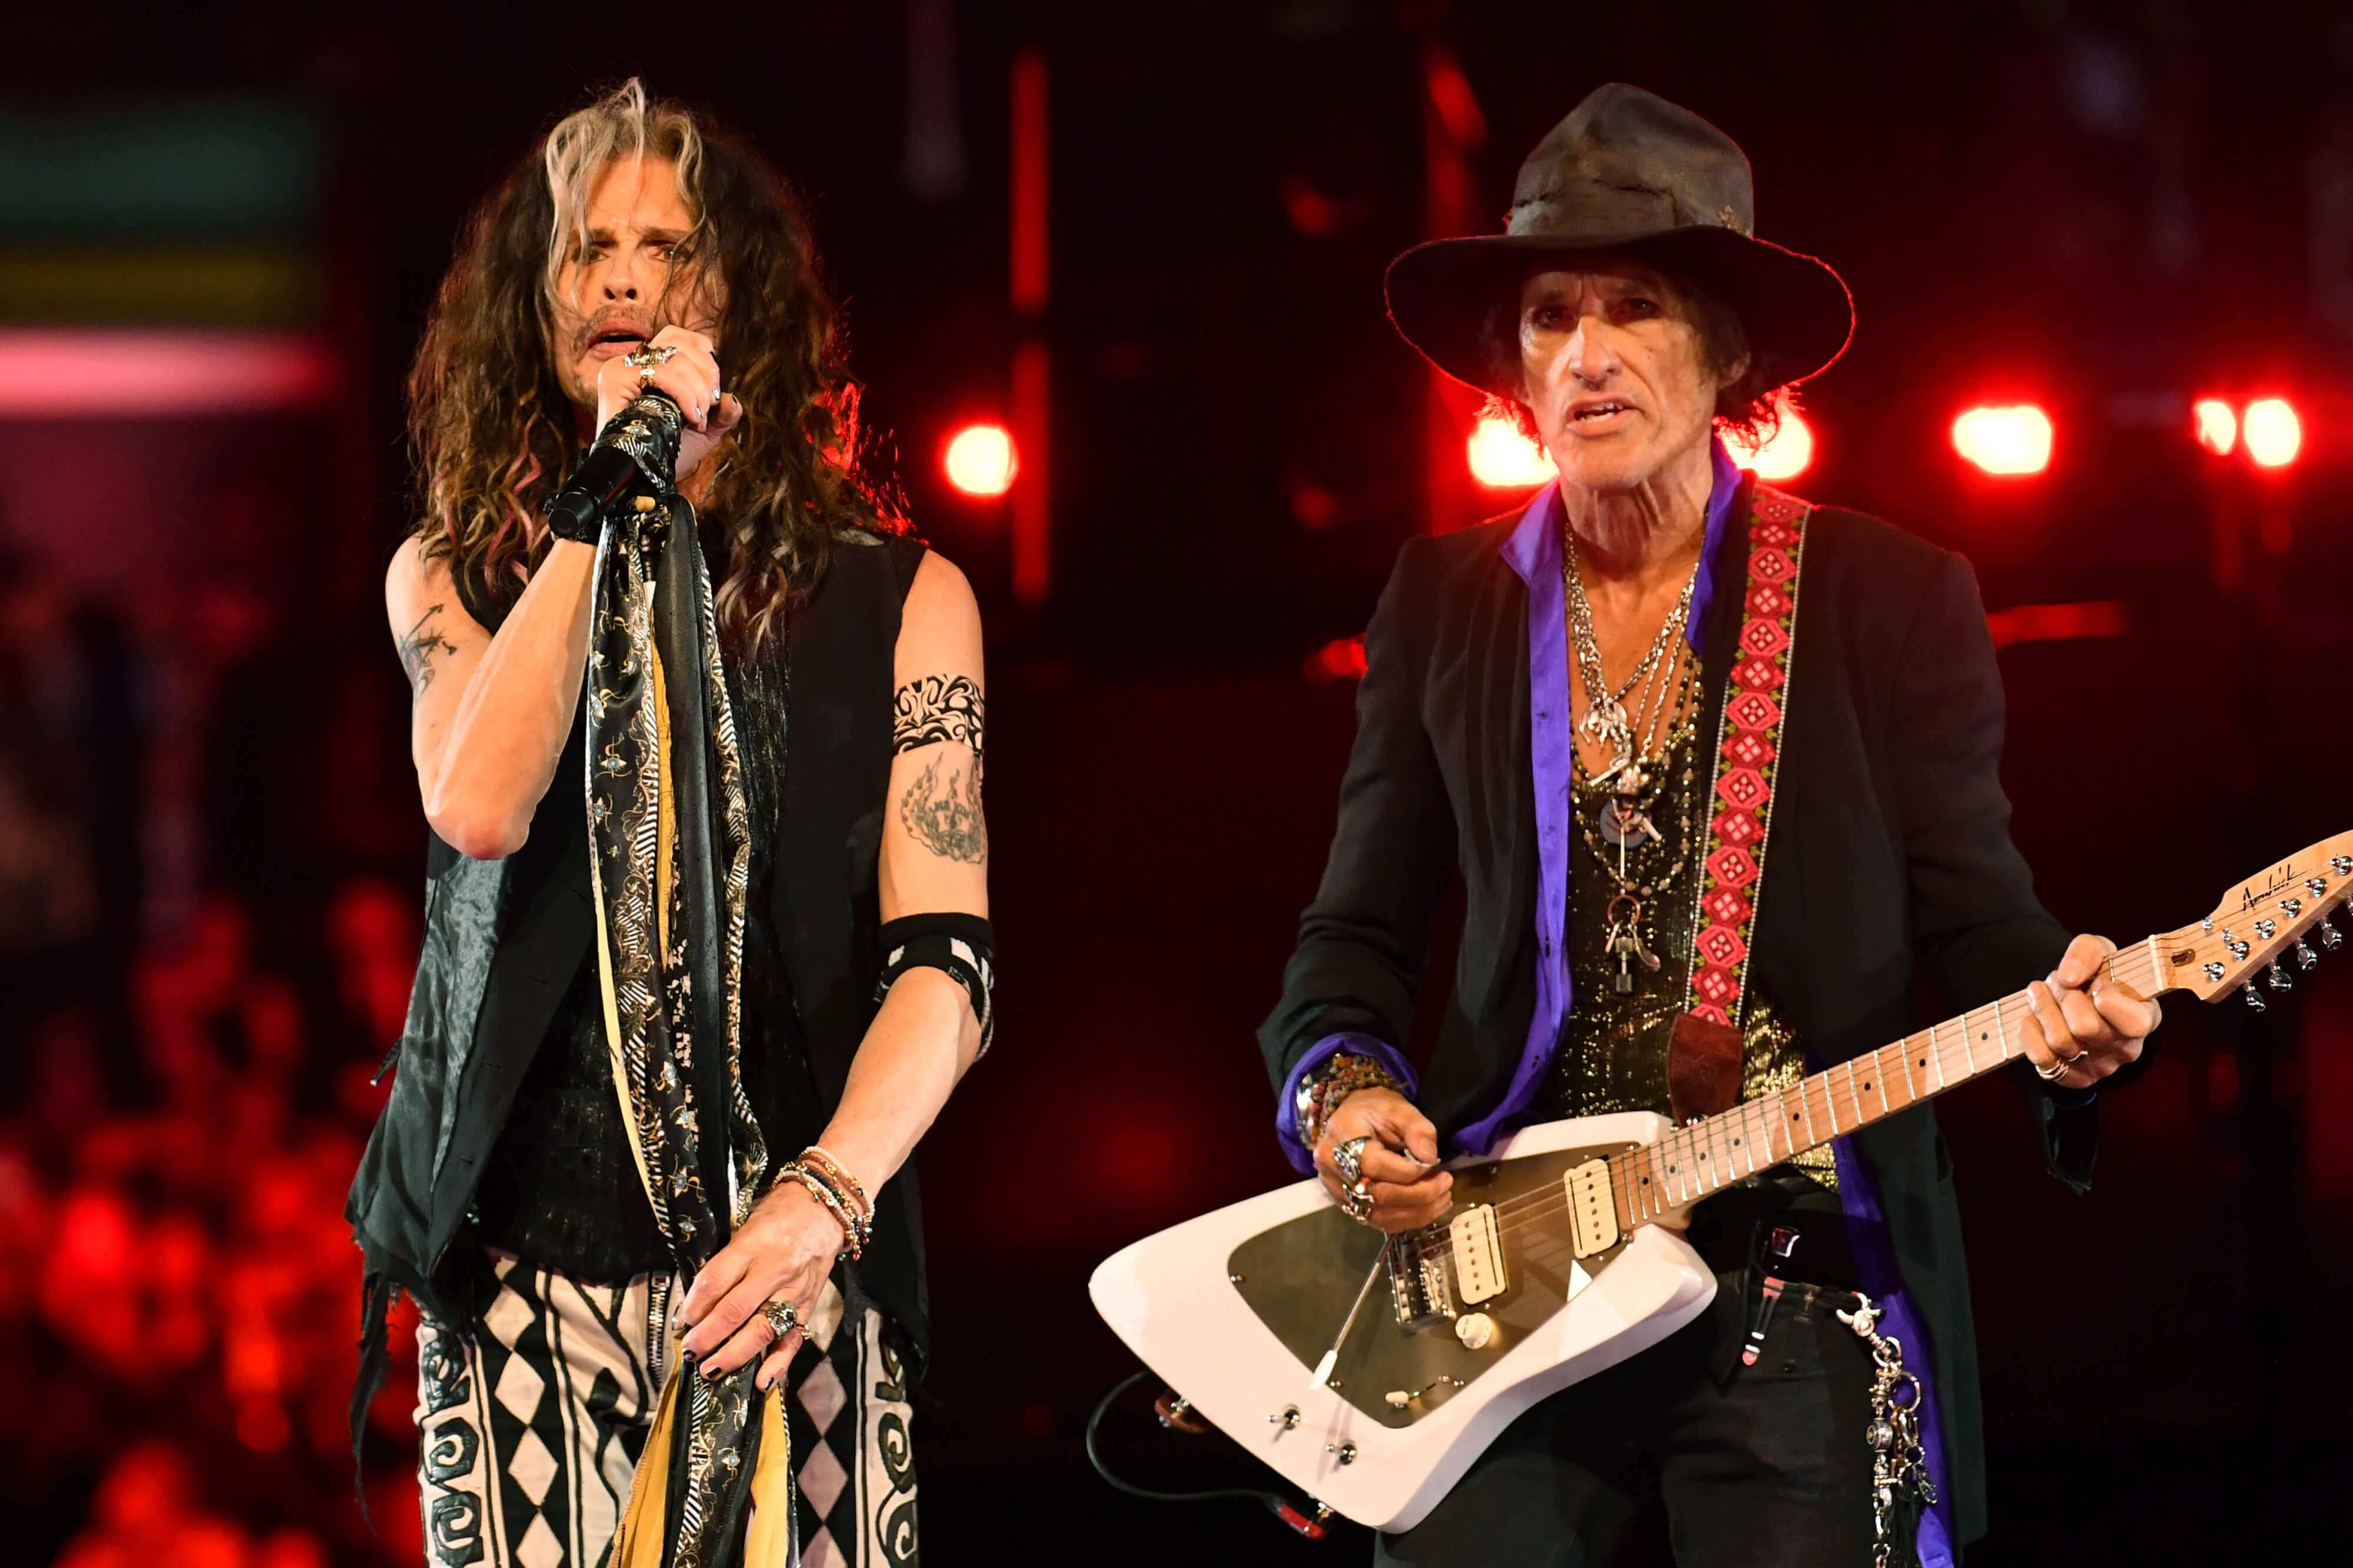 Steven Tyler and Joe Perry of Aerosmith who are teasing the band's farewell tour.